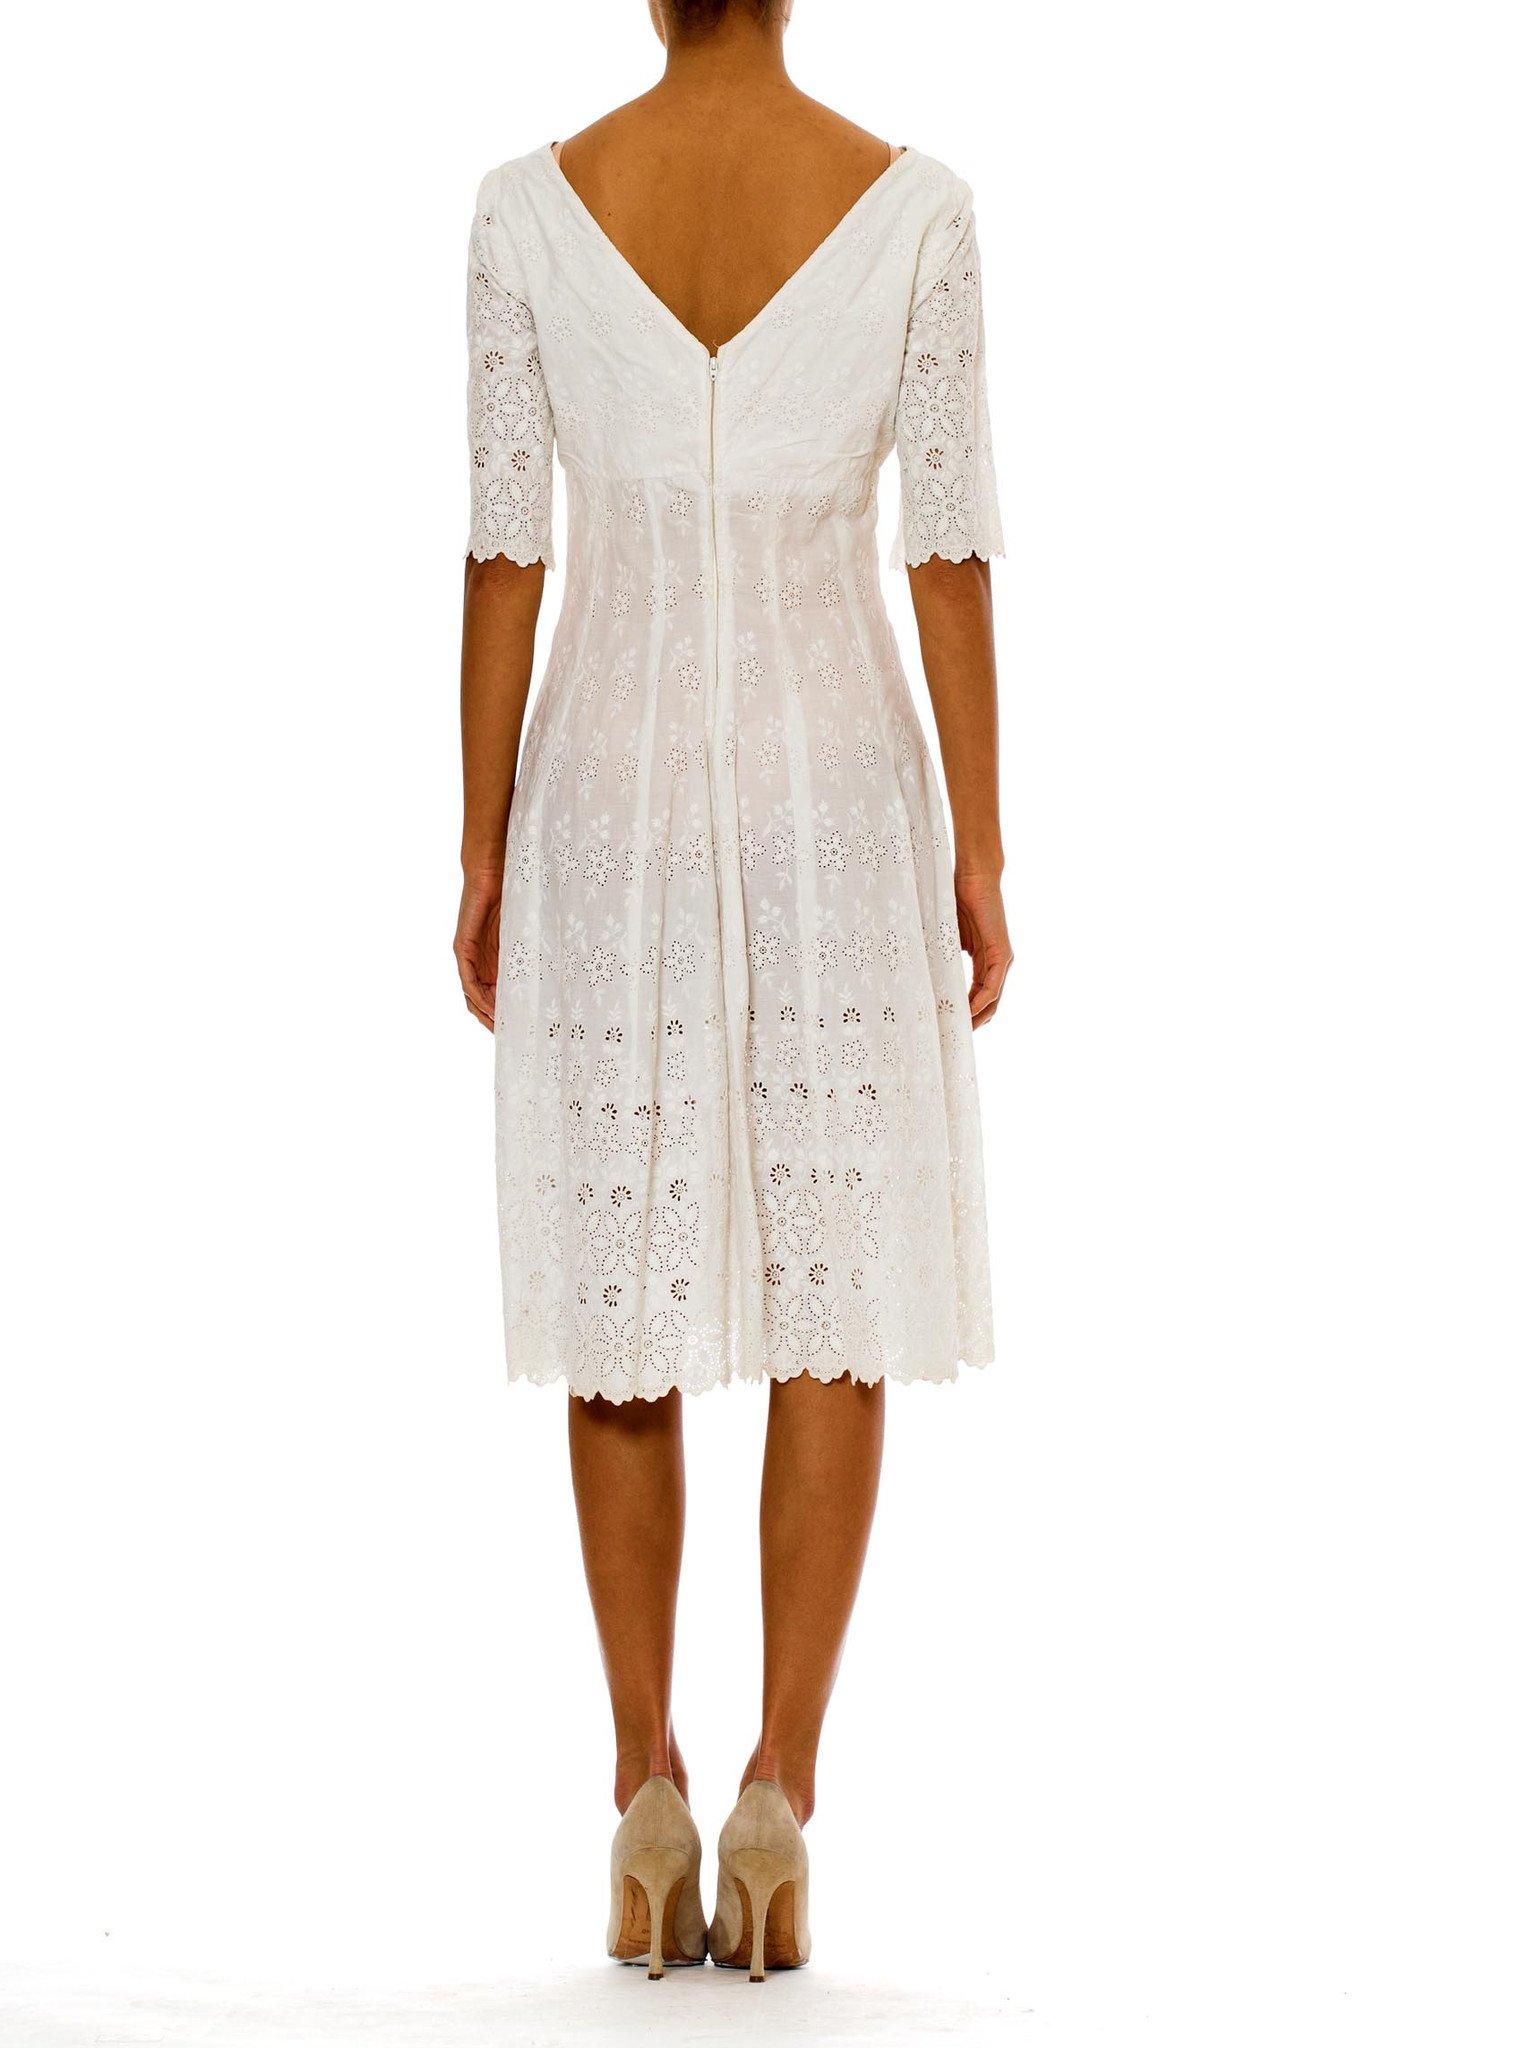 Victorian White Organic Cotton Dress With Floral Eyelet Embroidery & Scalloped  For Sale 2